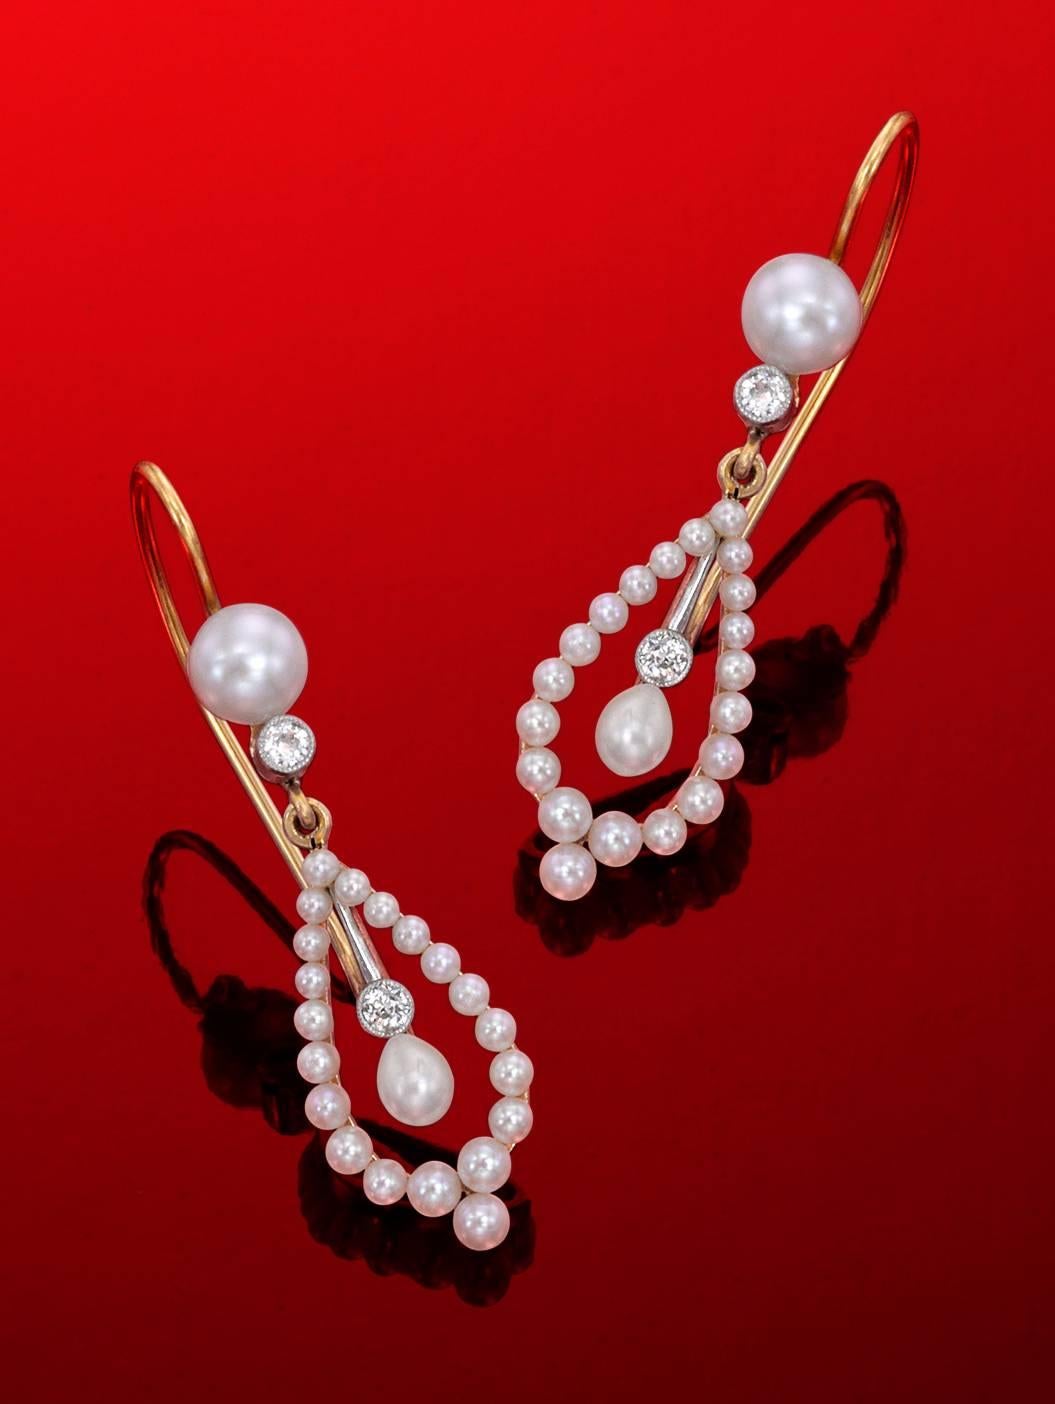 44 natural oriental pearls are accented by 4 European cut diamonds, (totaling .12 pts.) which are set in milgrained platinum bezels.  These sublime little beauties are approximately 1.25 inches long.  They bear no gold content  marks, which was not